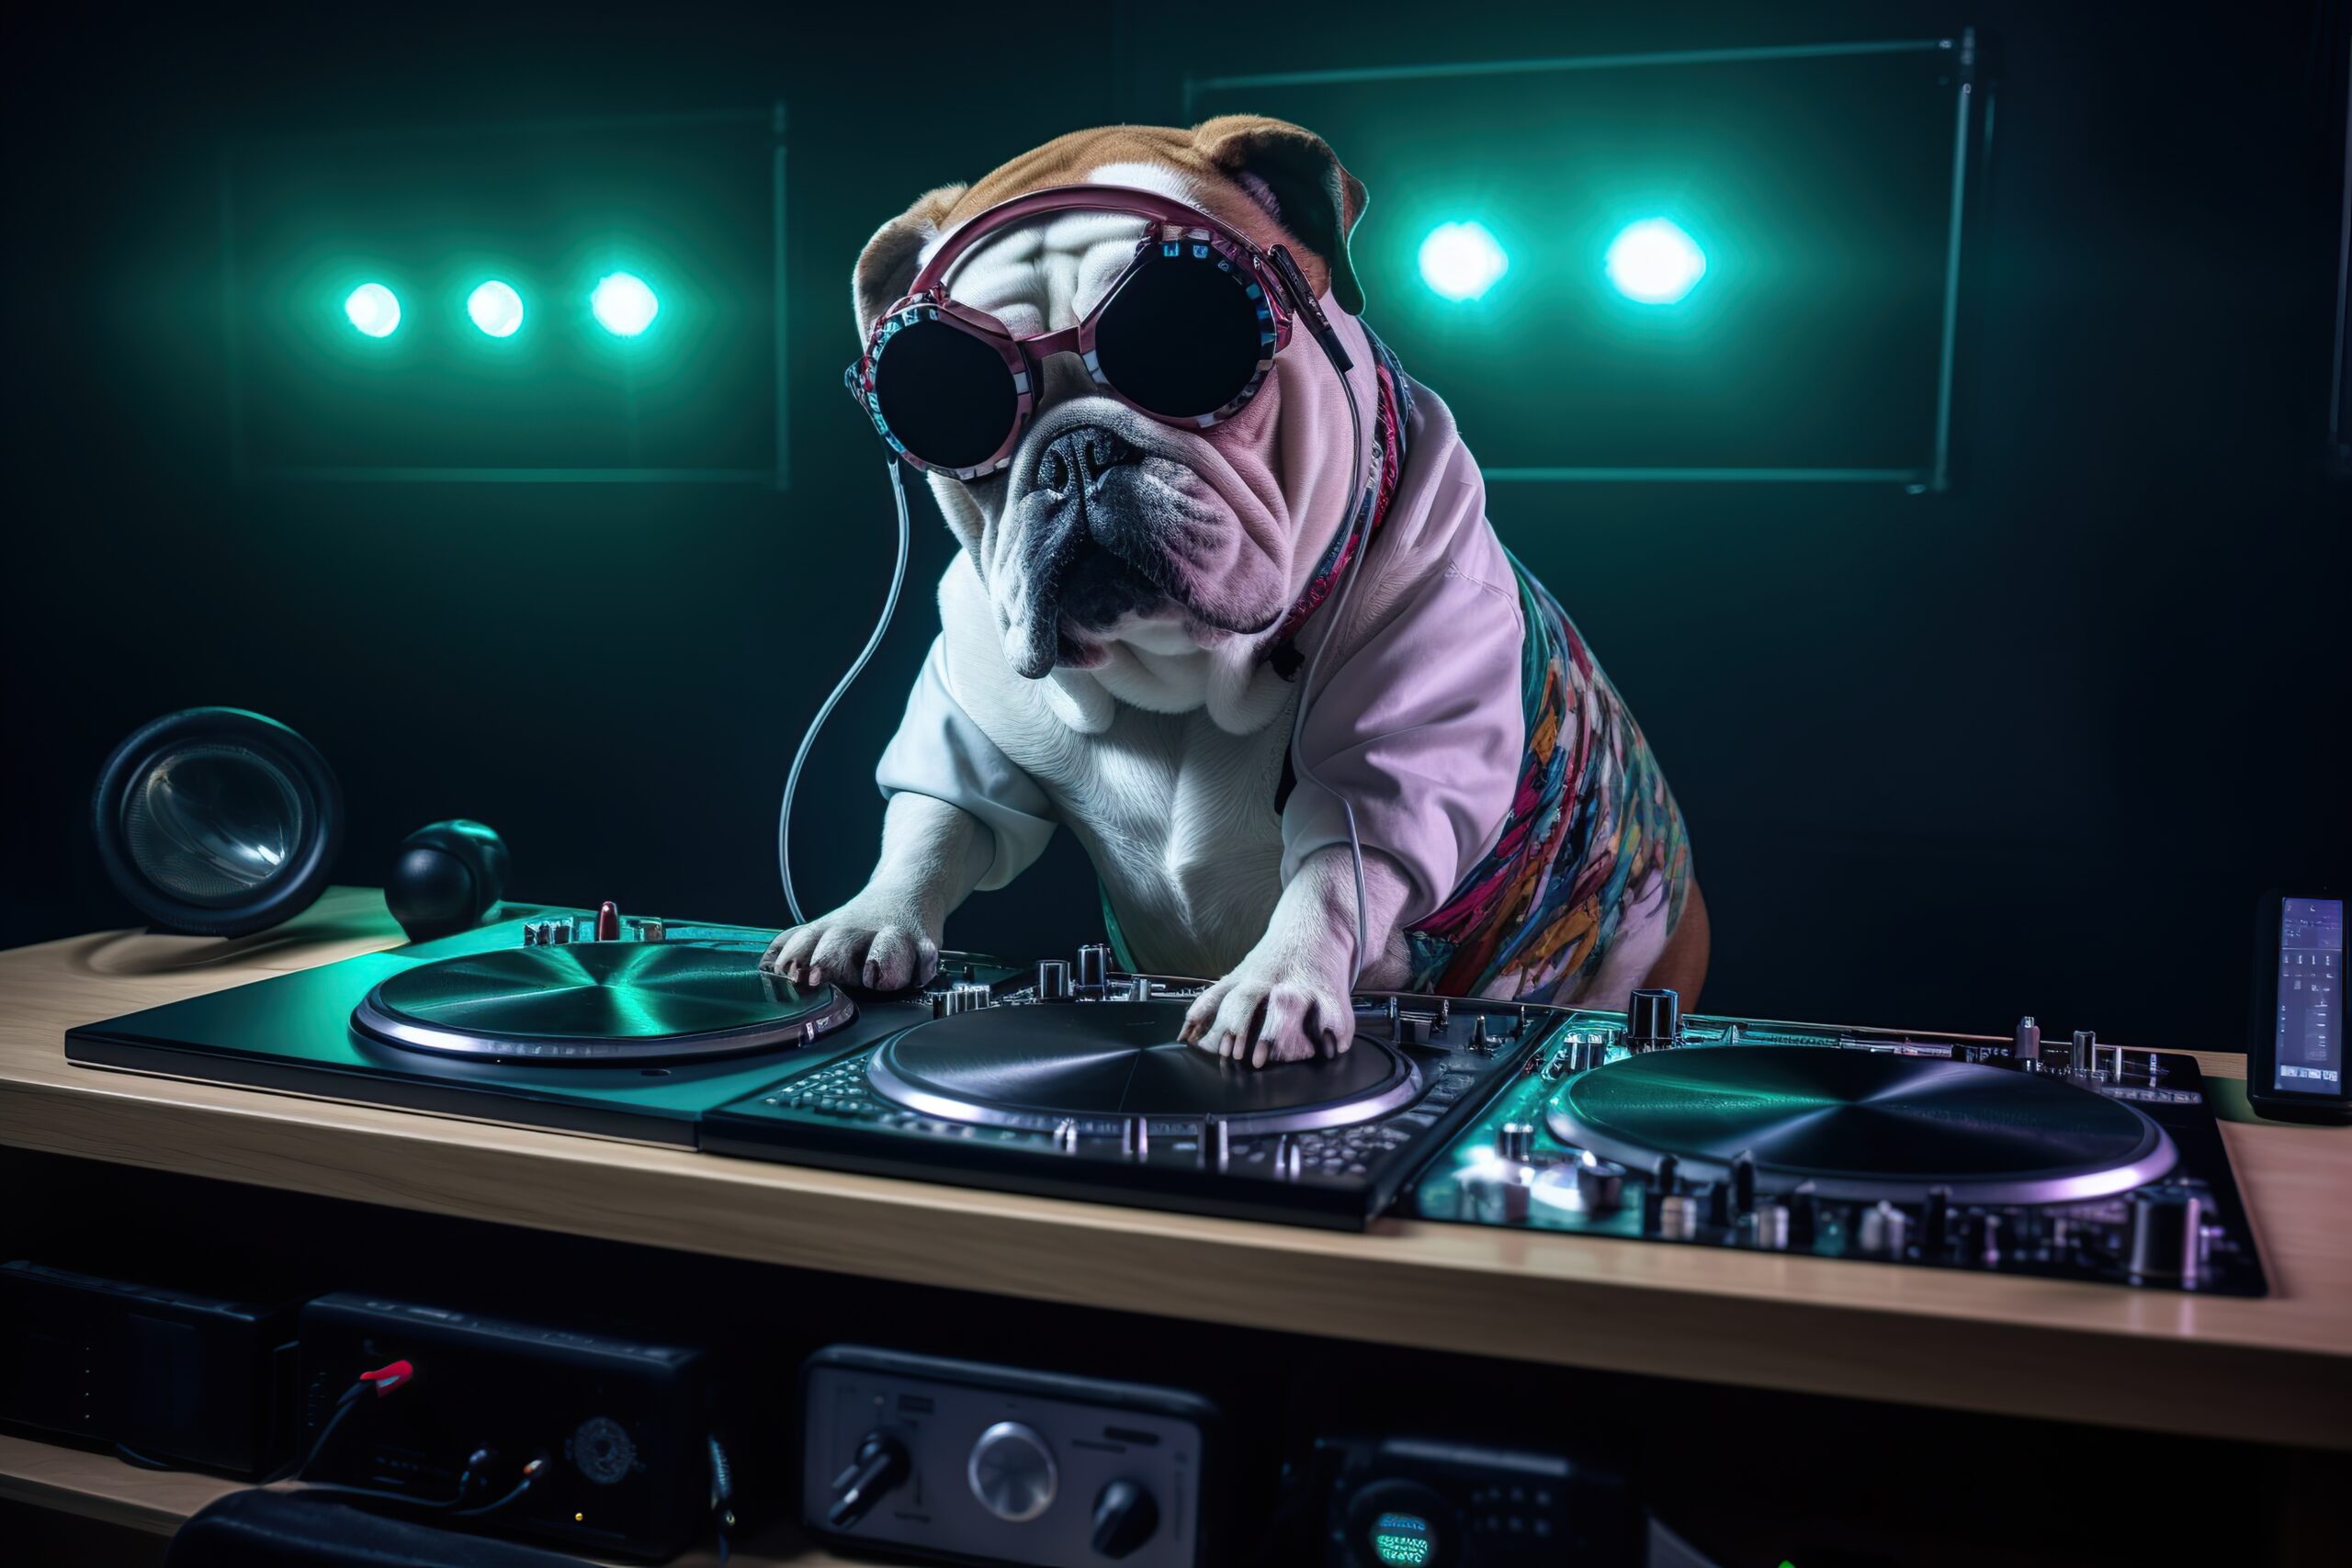 A bulldog with goggles and an outfit is a DJ with two turntables and a microphone.